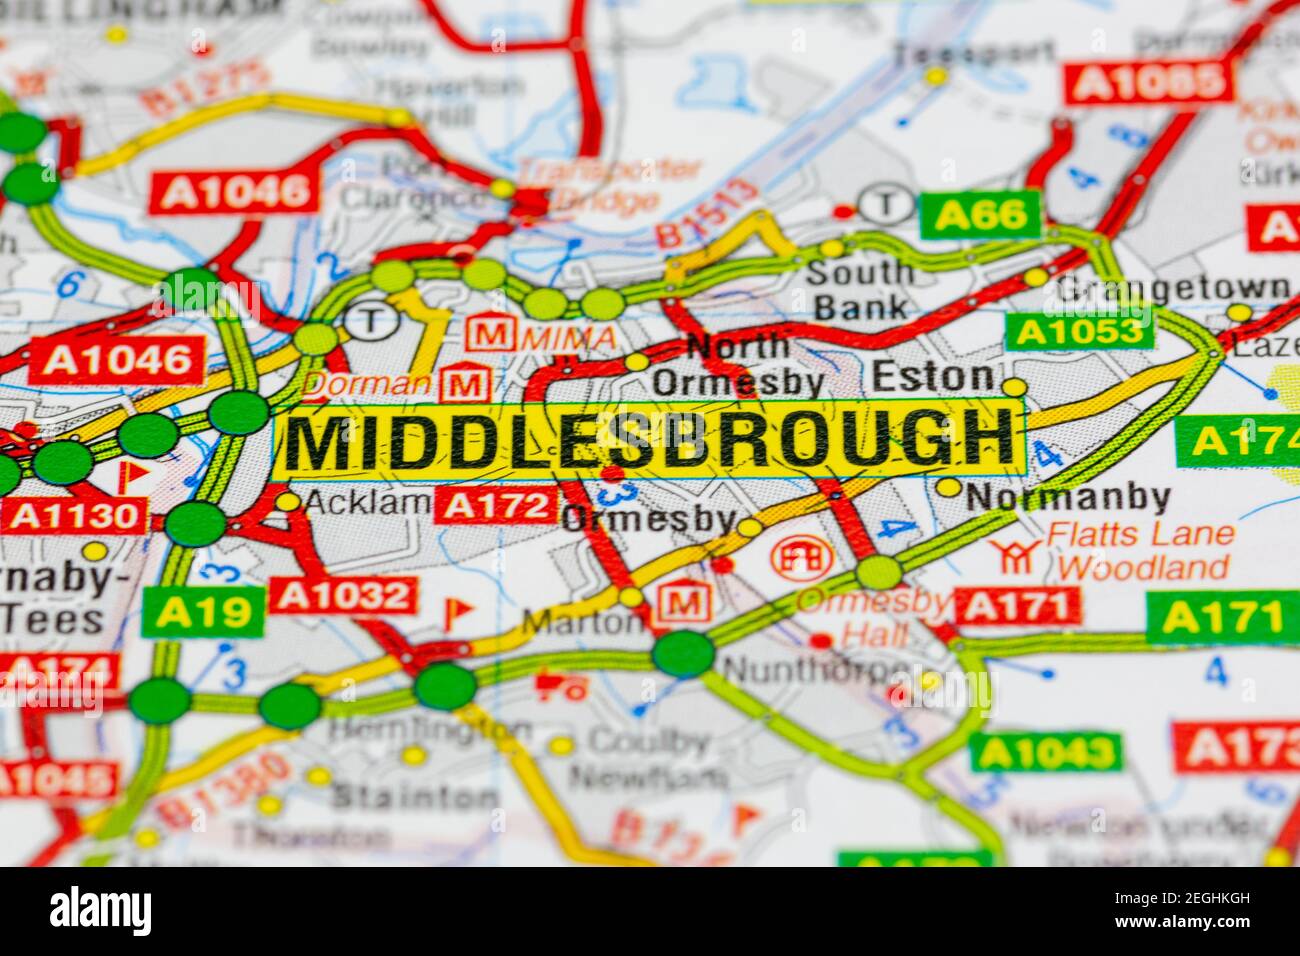 Middlesbrough And Surrounding Areas Shown On A Road Map Or Geography Map 2EGHKGH 